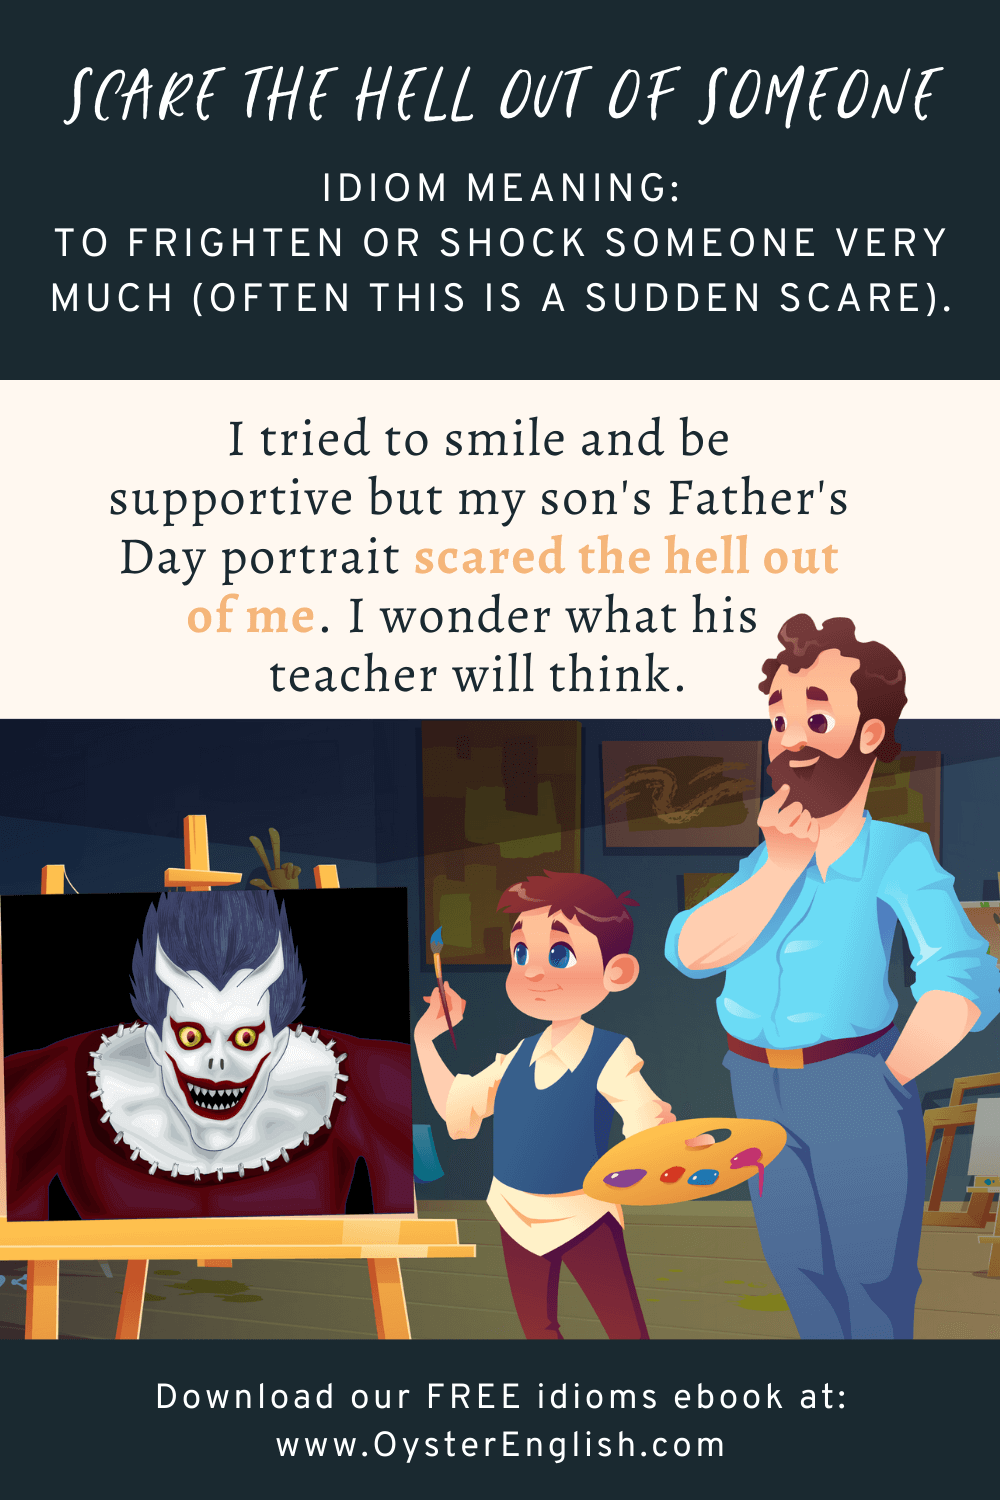 A boy stands at an easel holding the painting of an evil demon. A puzzled father looks on: I tried to smile and be supportive but my son's Father's Day portrait scared the hell out of me."